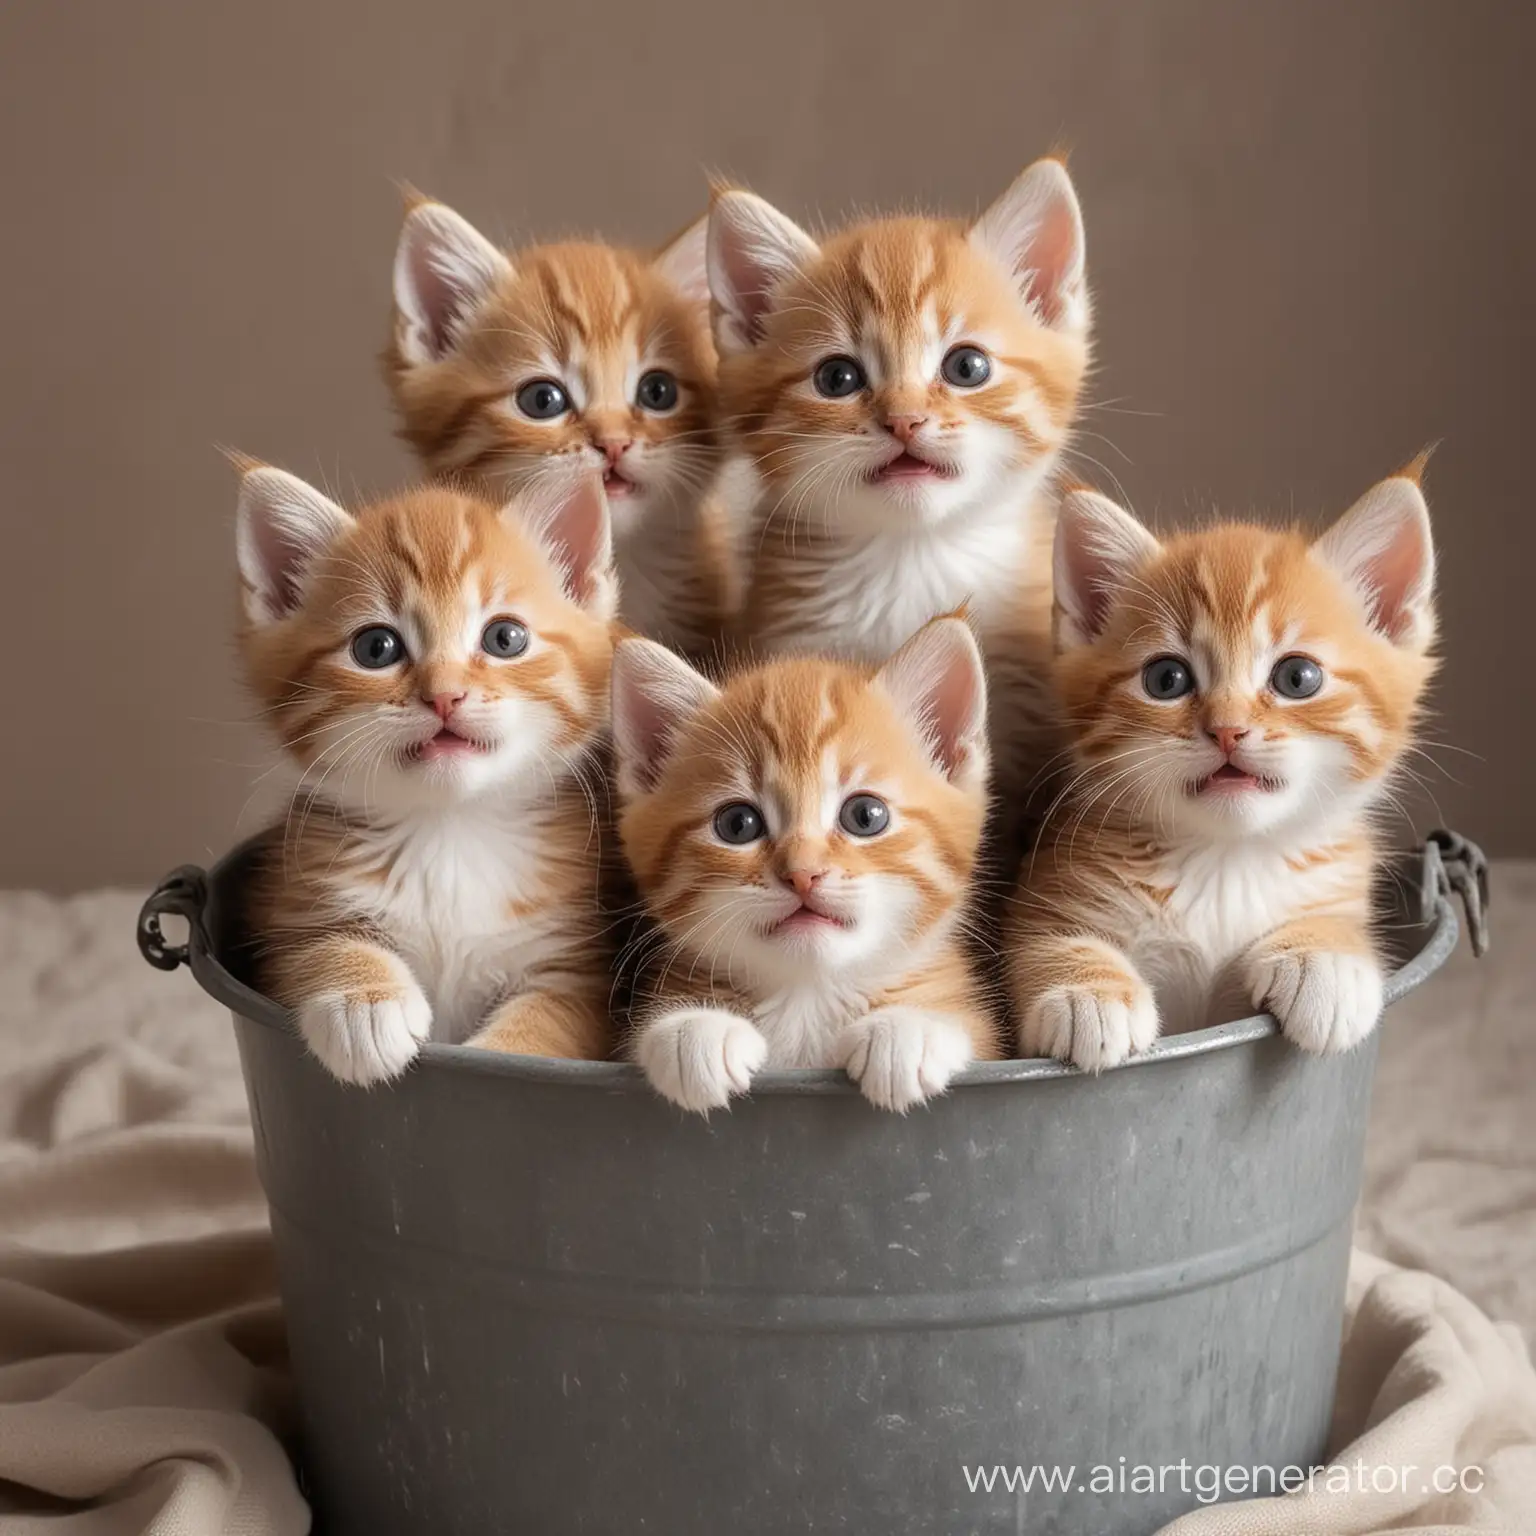 Cheerful-Kittens-Sitting-in-a-Bucket-Adorable-Feline-Companions